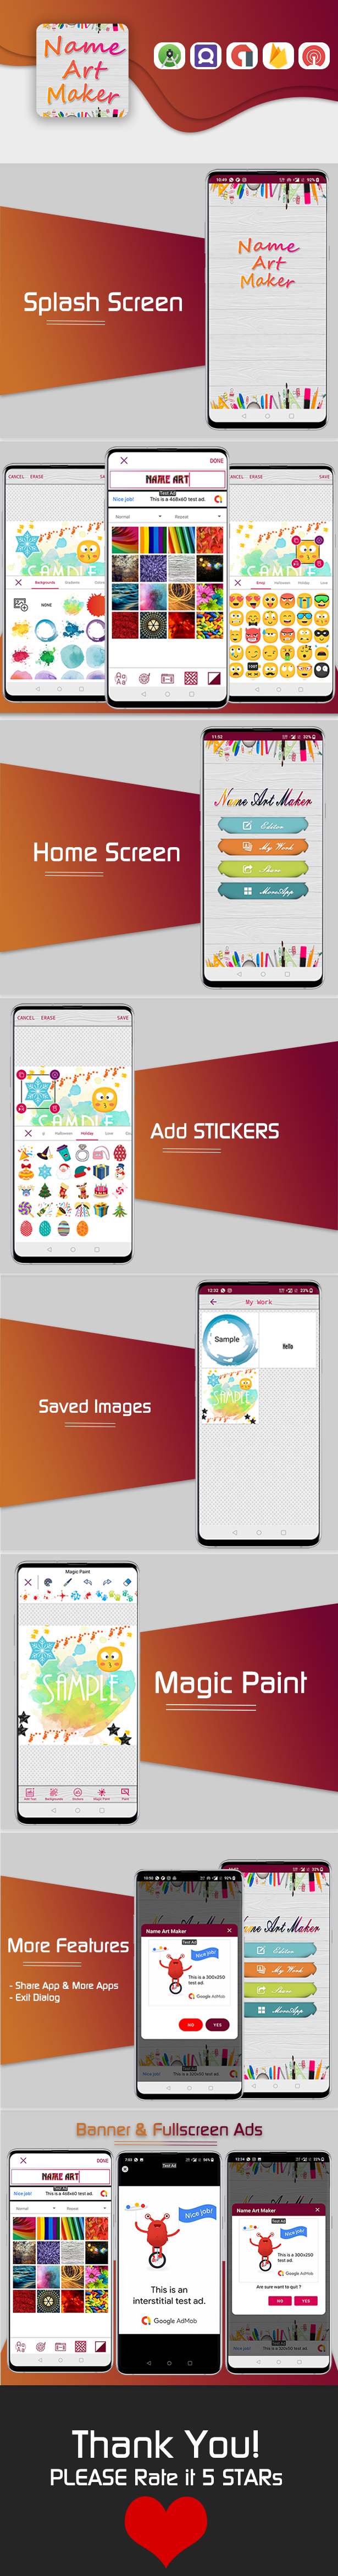 Name Art Maker Android App (Materials Included) - Admob & FAN - 2